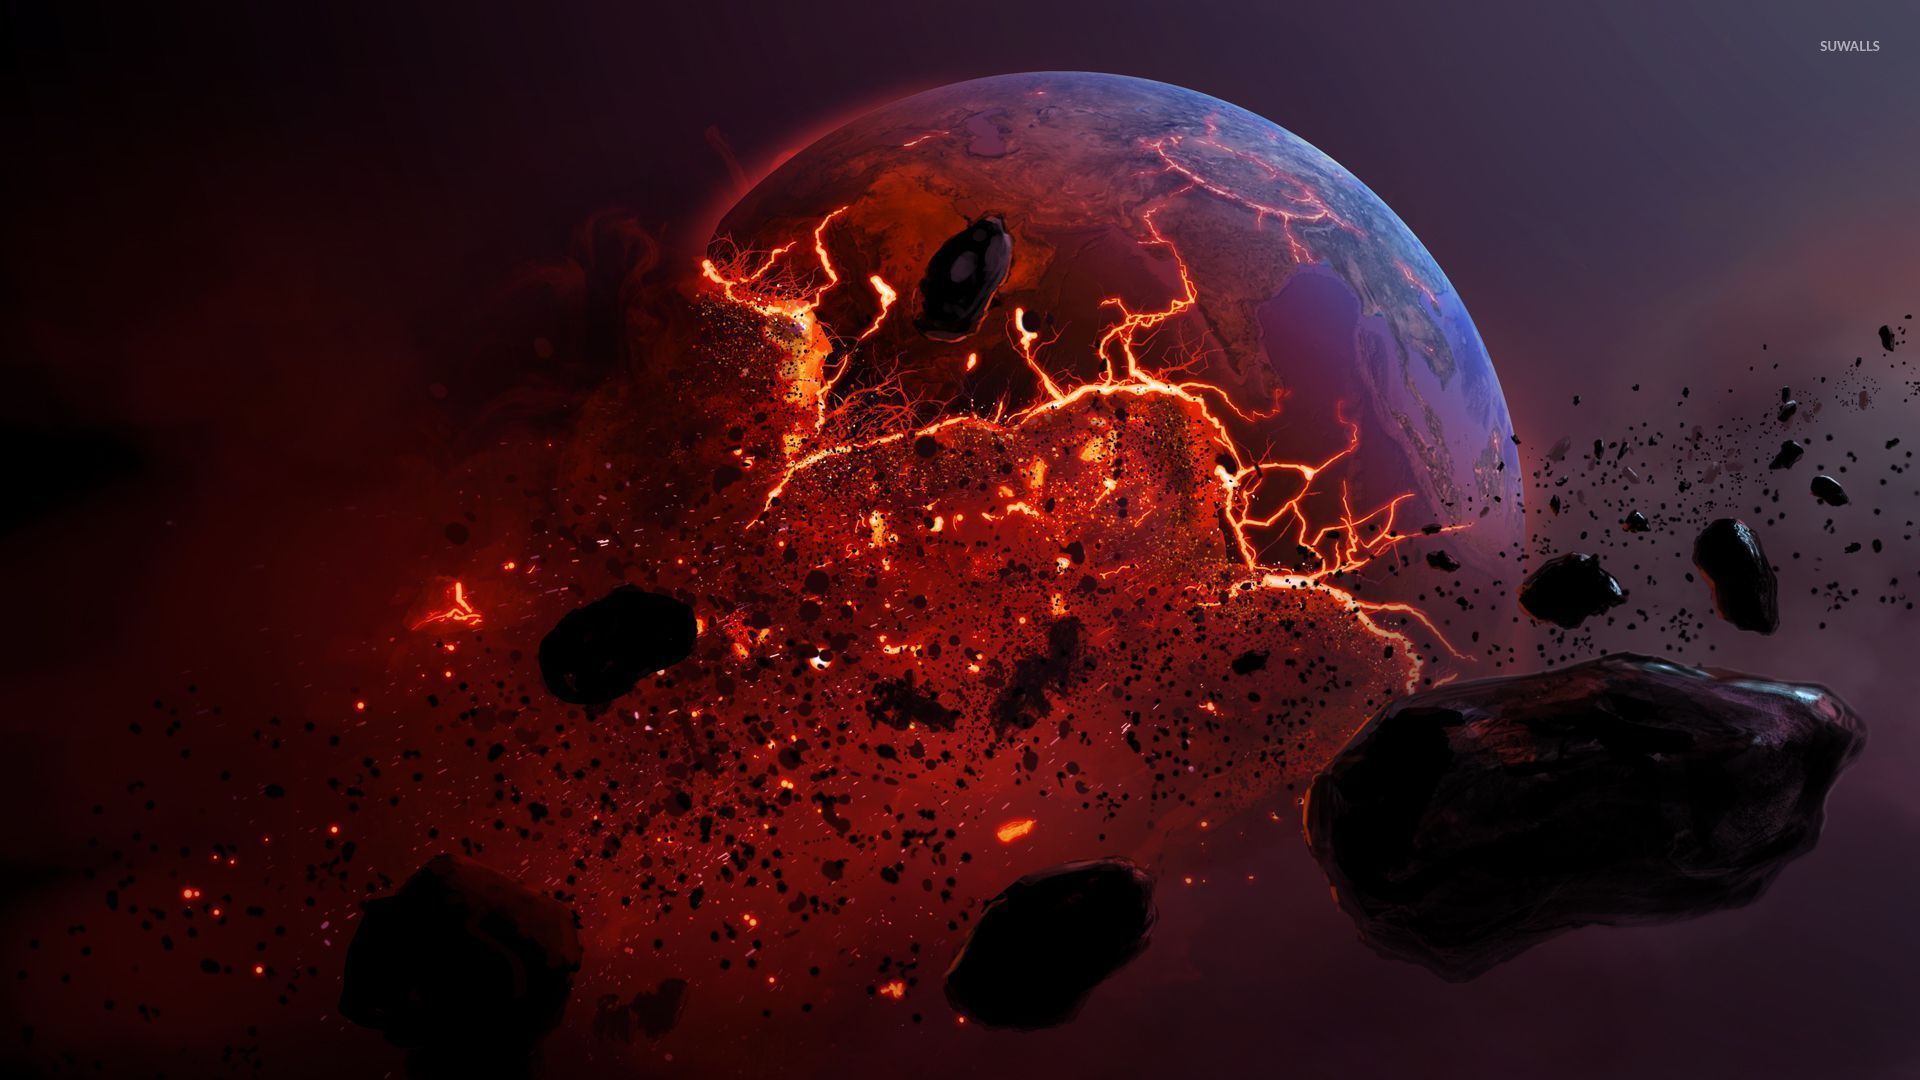 Planet Explosion Wallpaper Free Planet Explosion Background